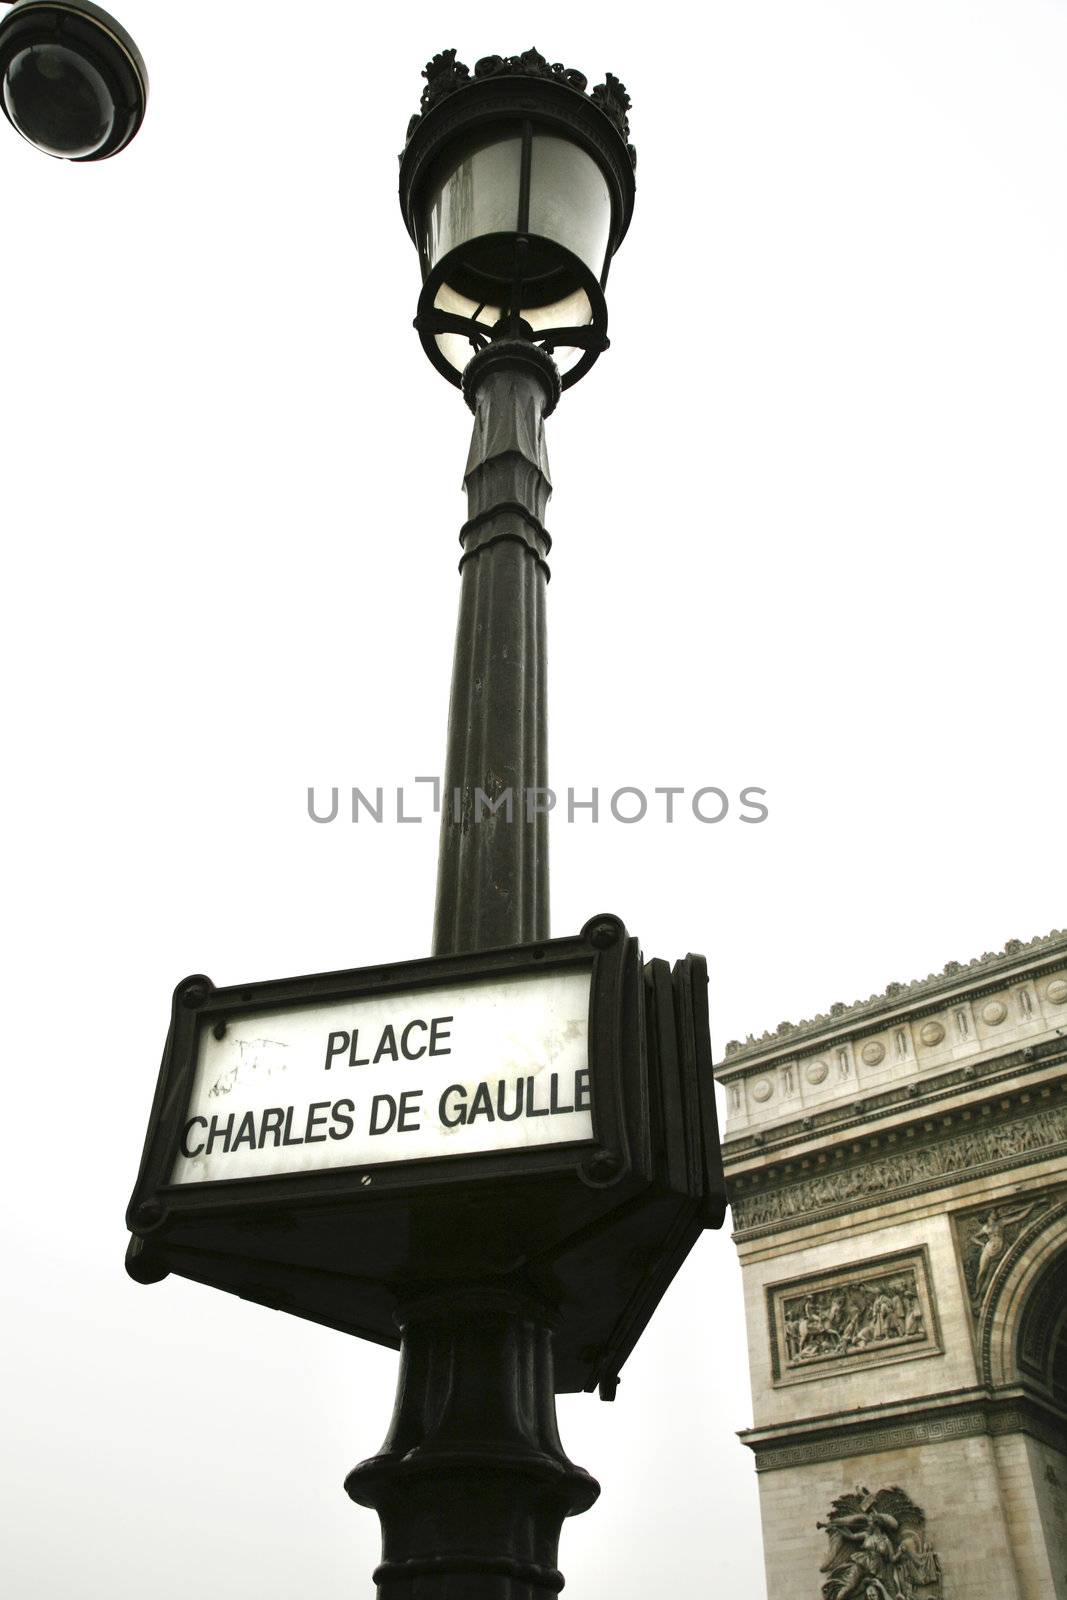 lamppost with de gaulle square sign in paris france